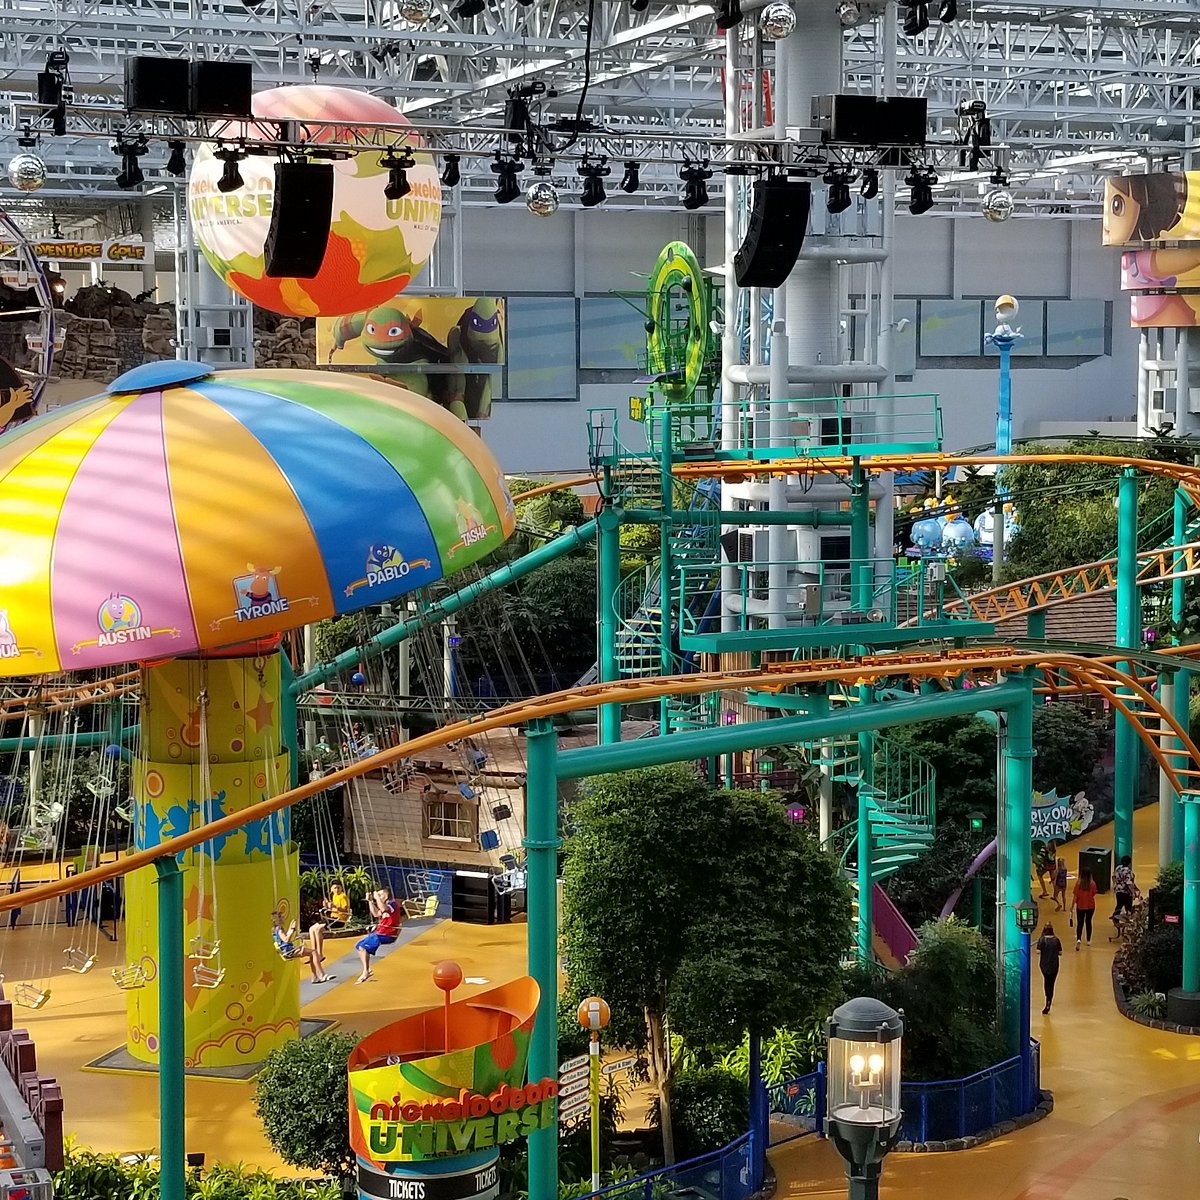 List 90+ Images pics of the mall of america Excellent